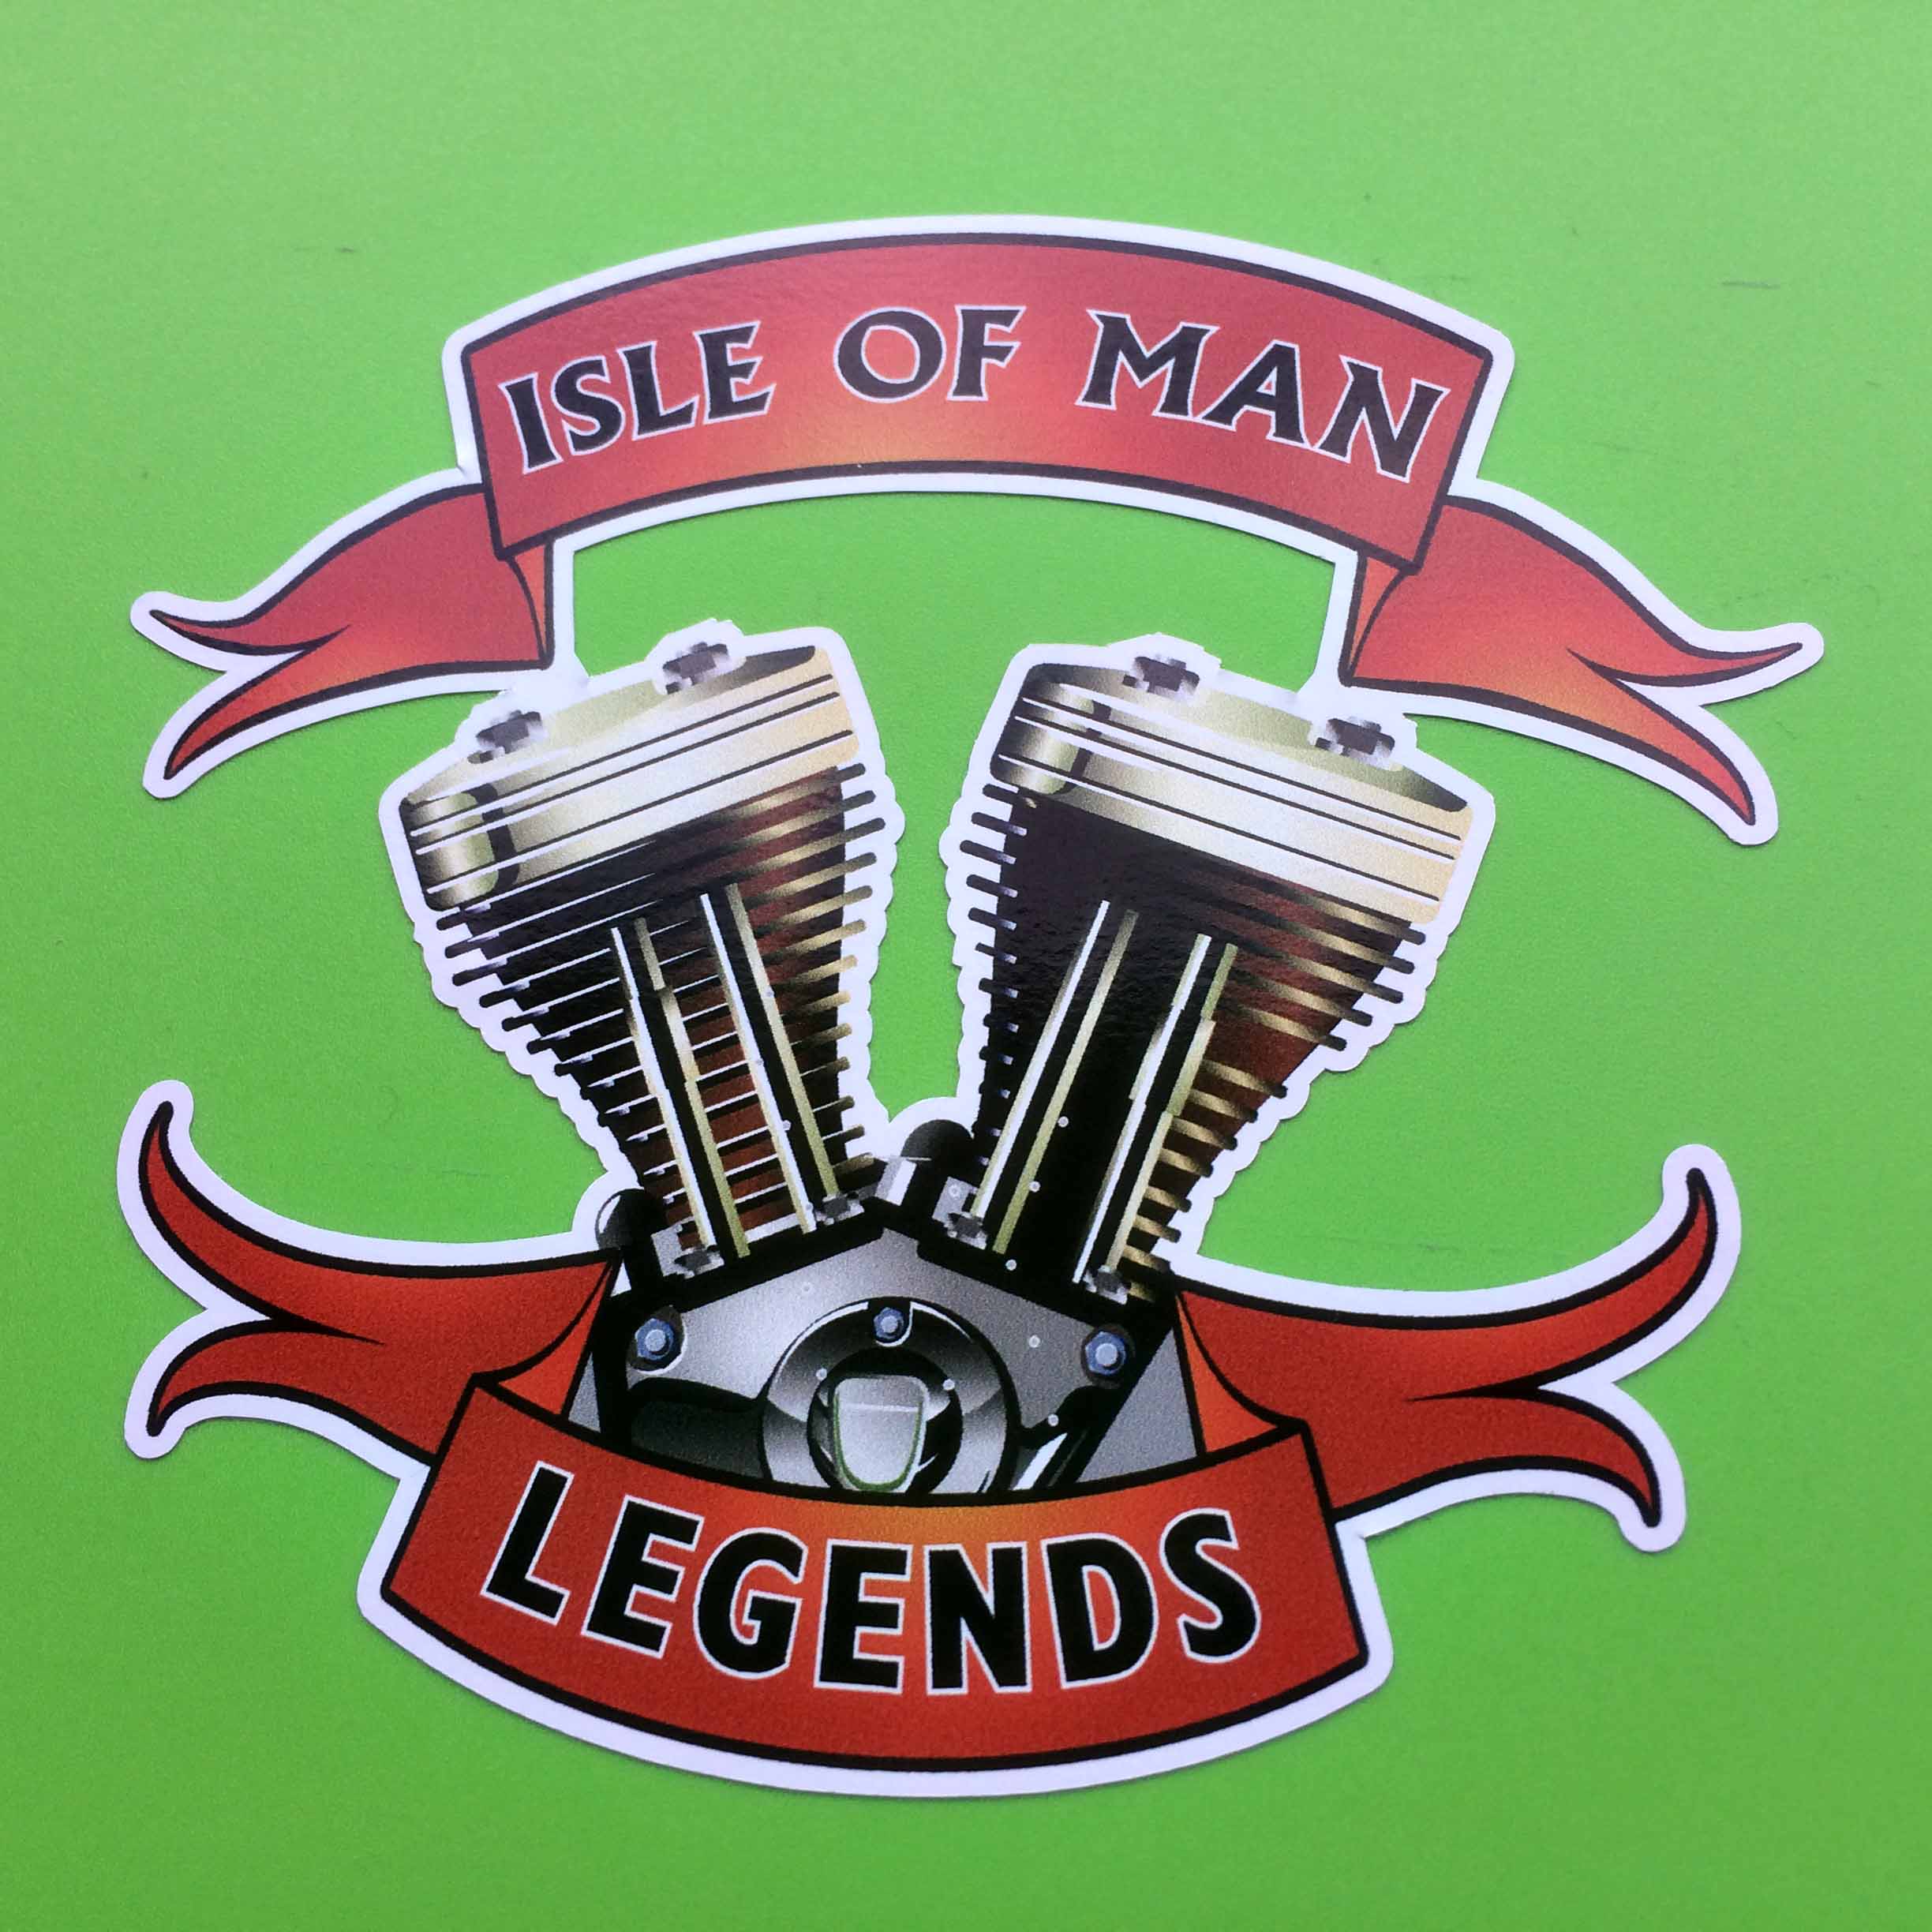 Isle Of Man Legends in black lettering on two red banners. An image of a V block crankcase sits between the banners.